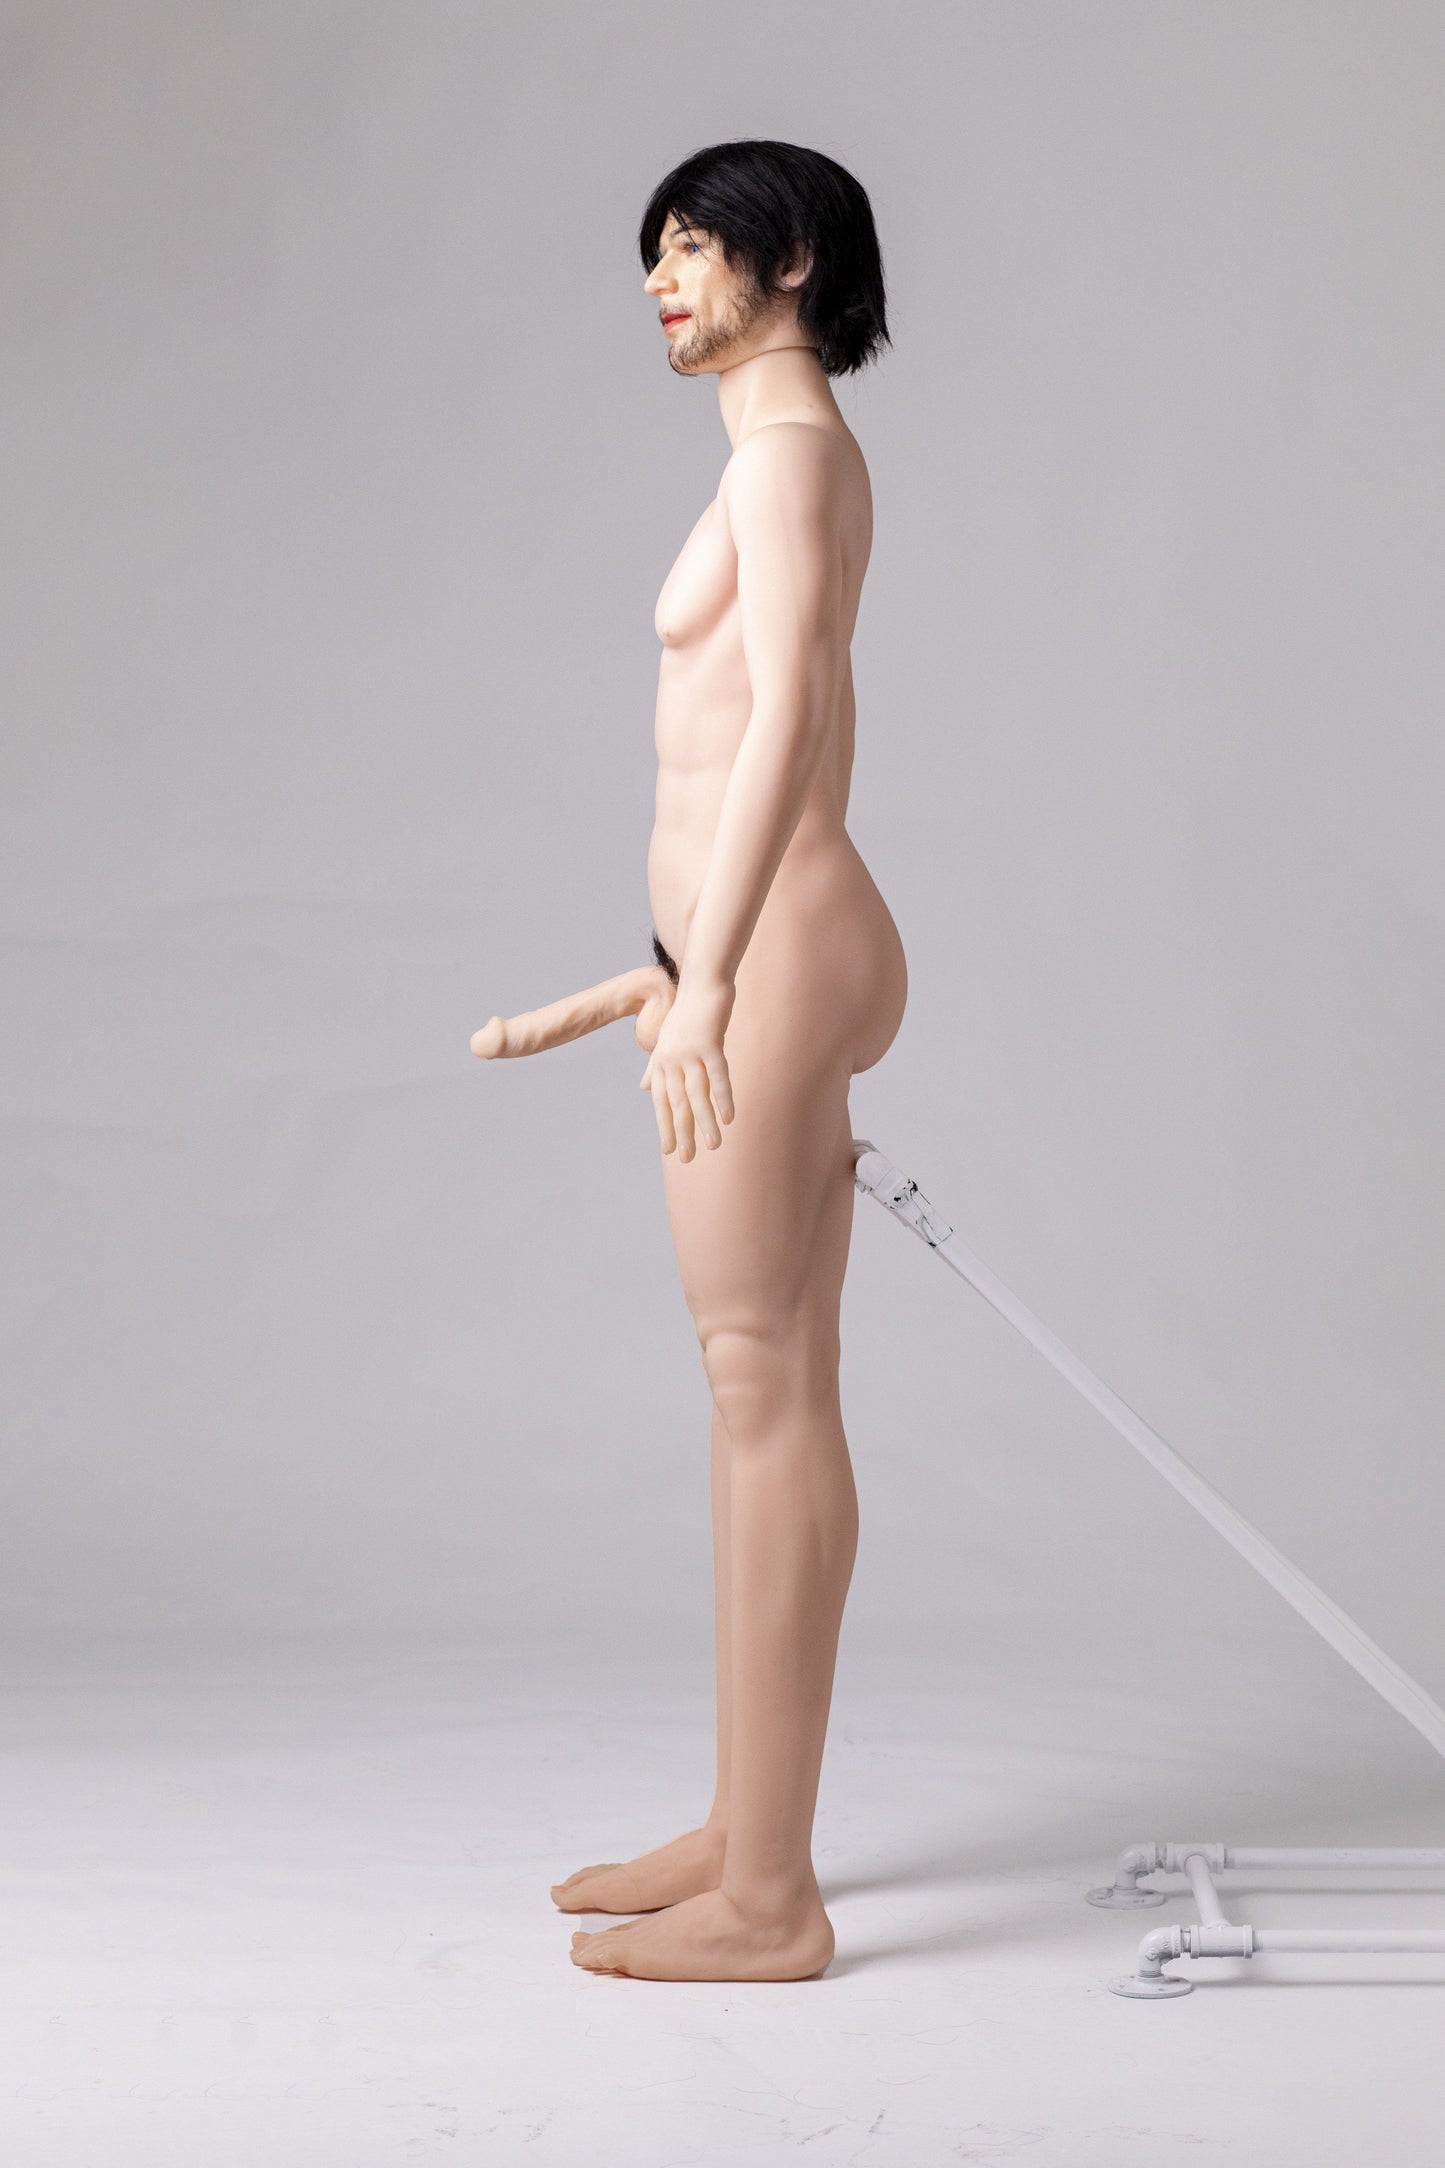 Jordan - 167cm | 5' 4" - Male Doll (SALE - Ready to ship from the US)